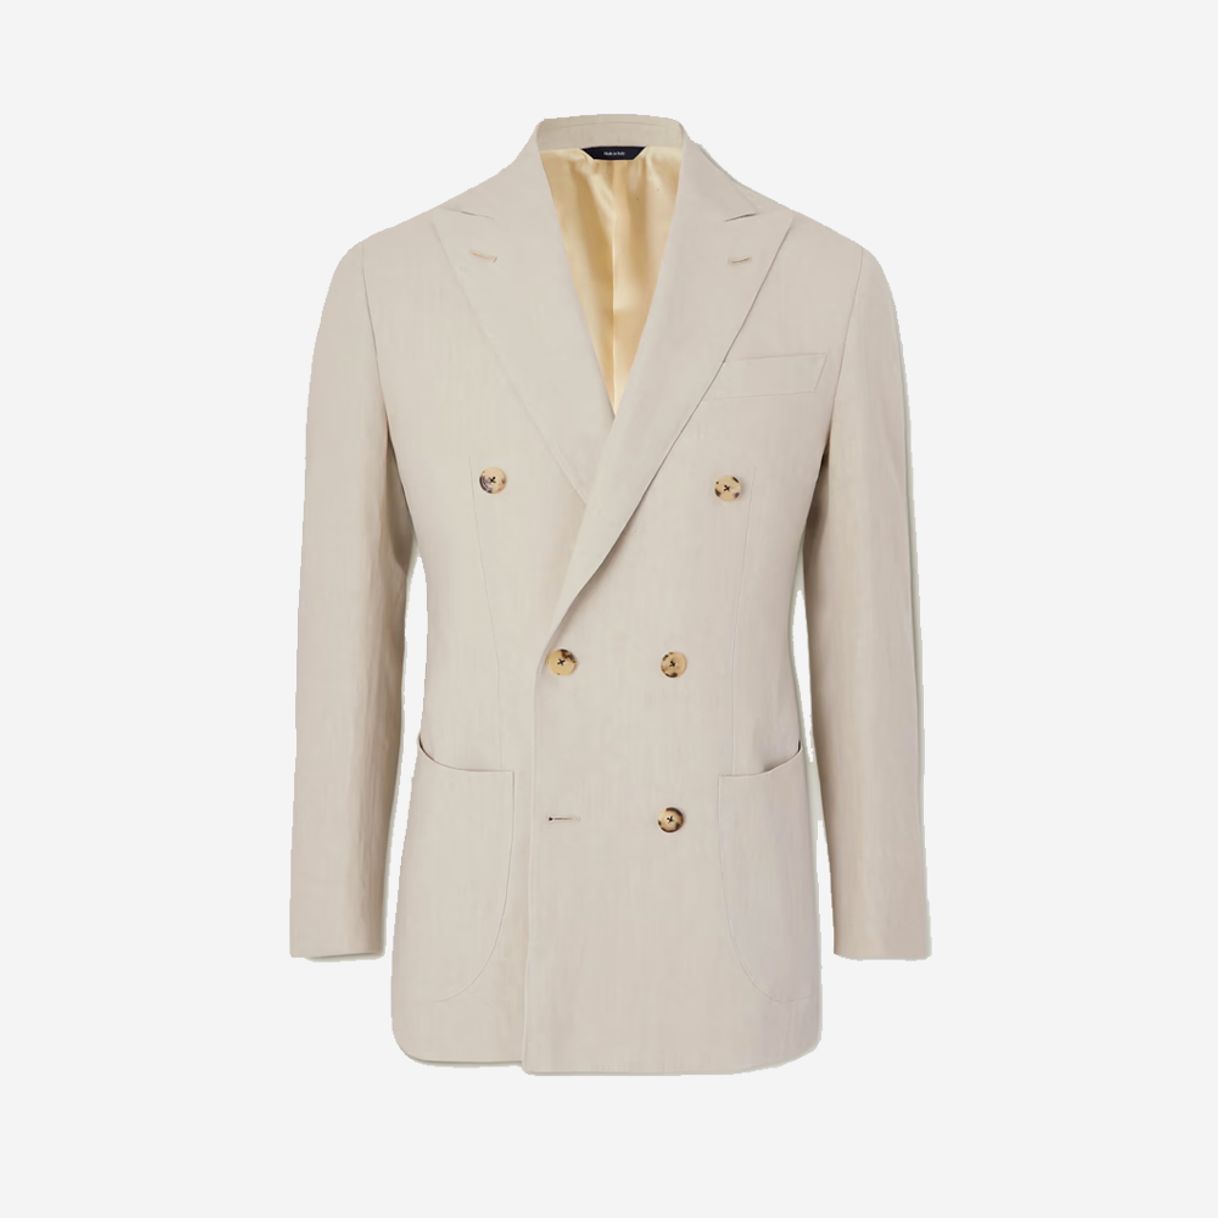 Thom Sweeney Double-Breasted Linen Jacket